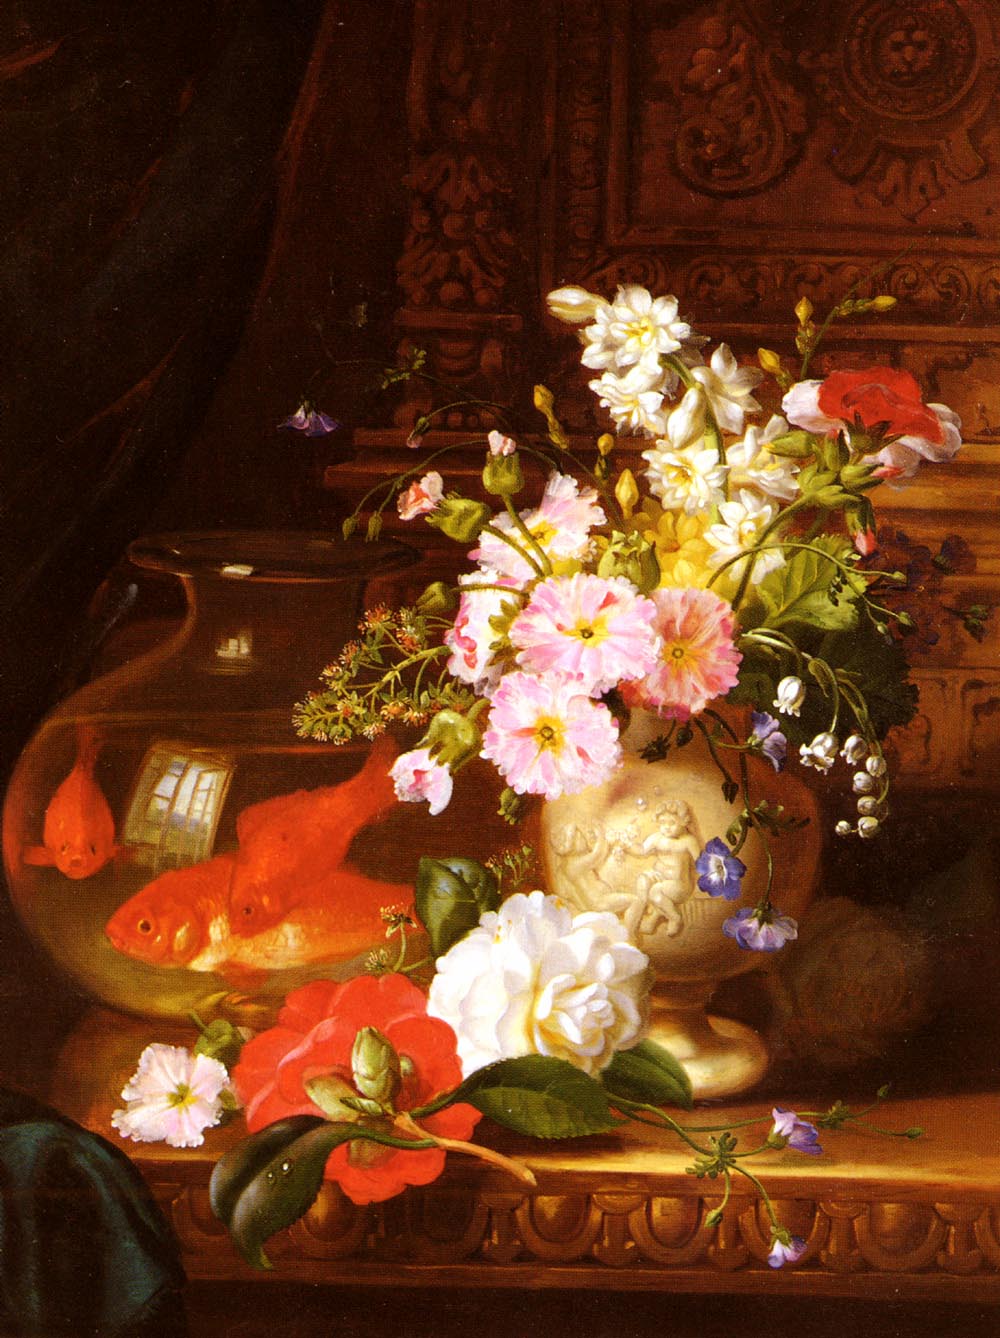 Still Life With Camellias Primroses And Lily Of The Valley In An Urn By A Goldfish Bowl by John Wainwright